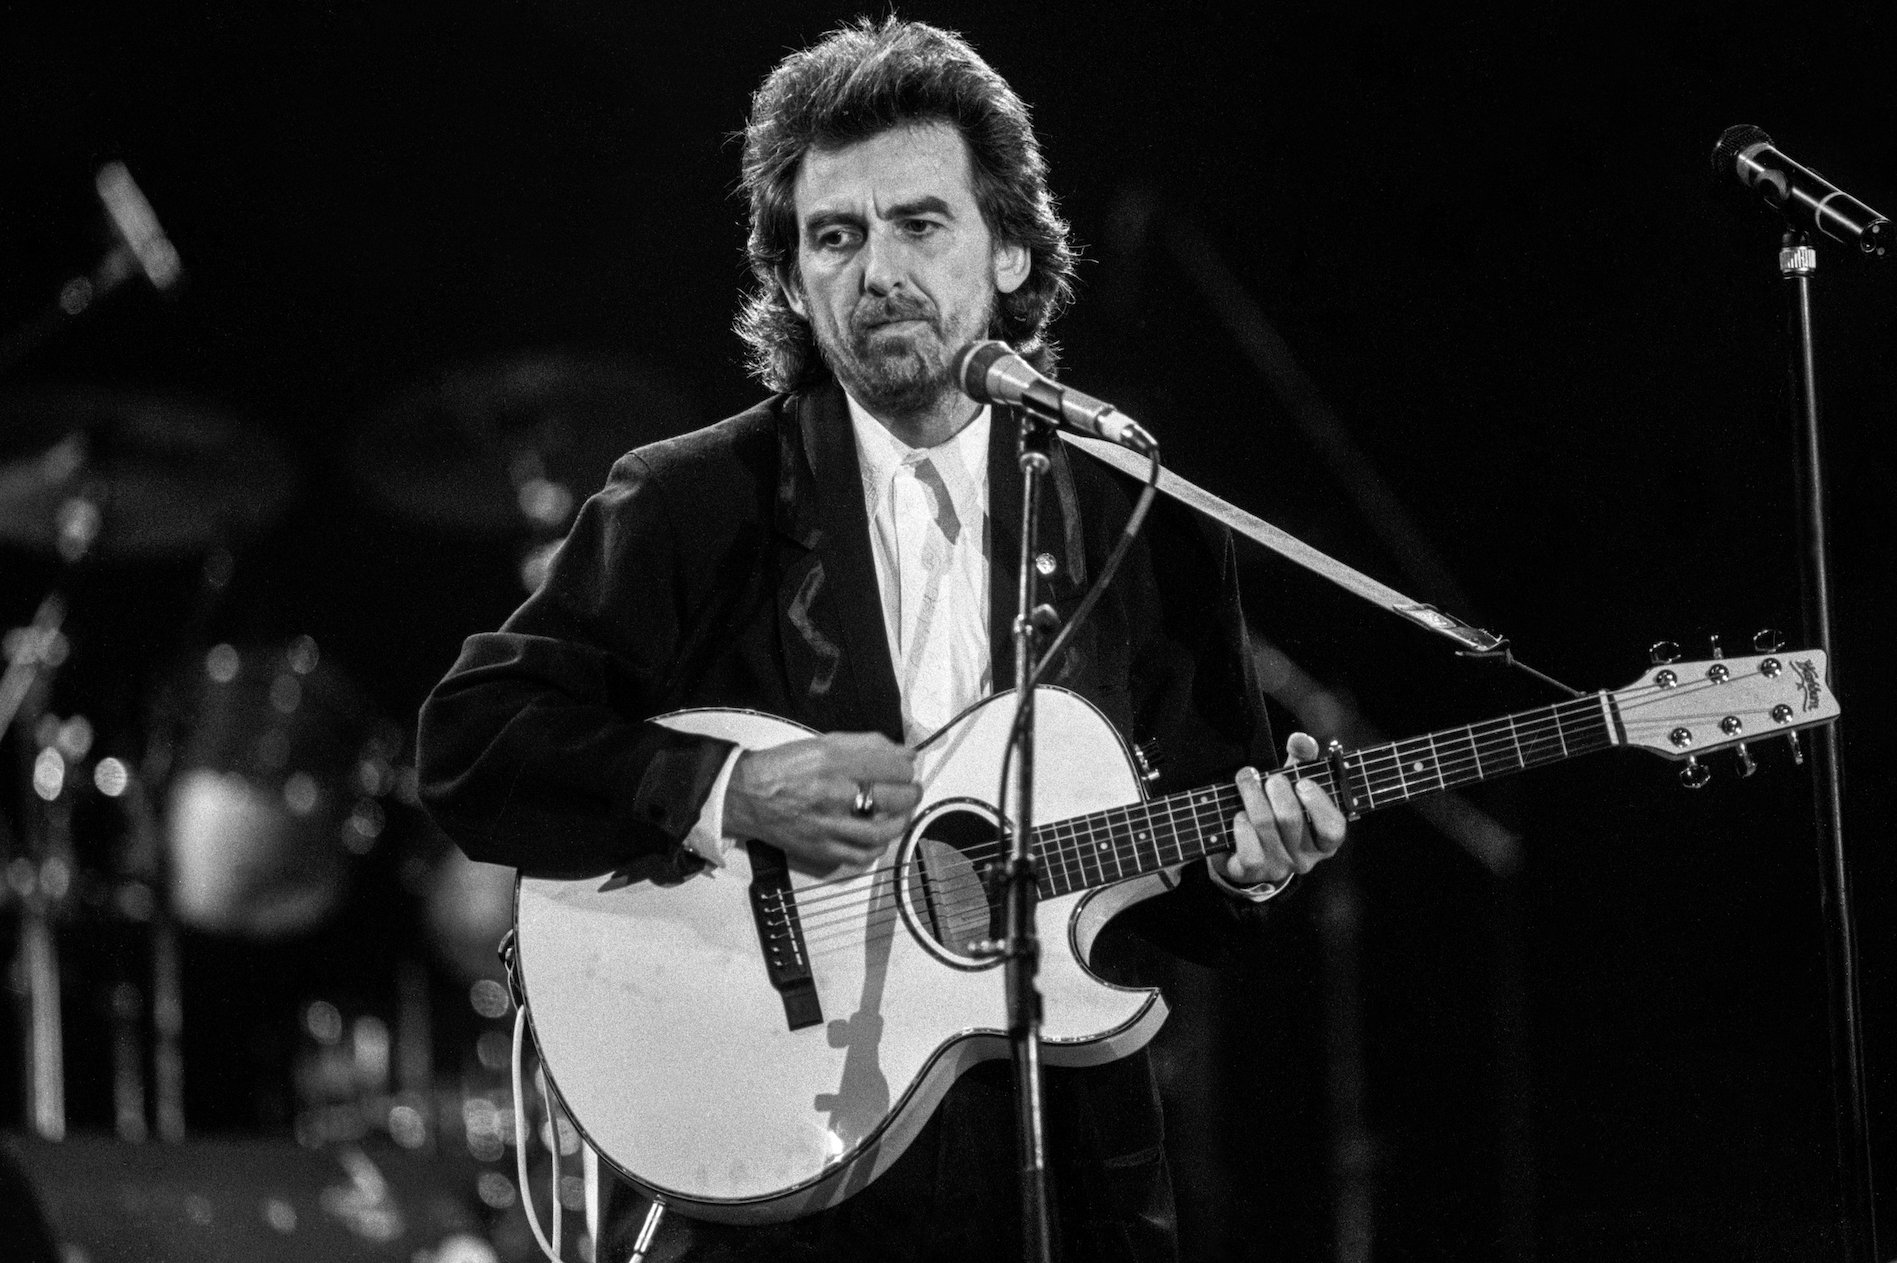 George Harrison performs at the Prince's Trust Concert in London in 1987